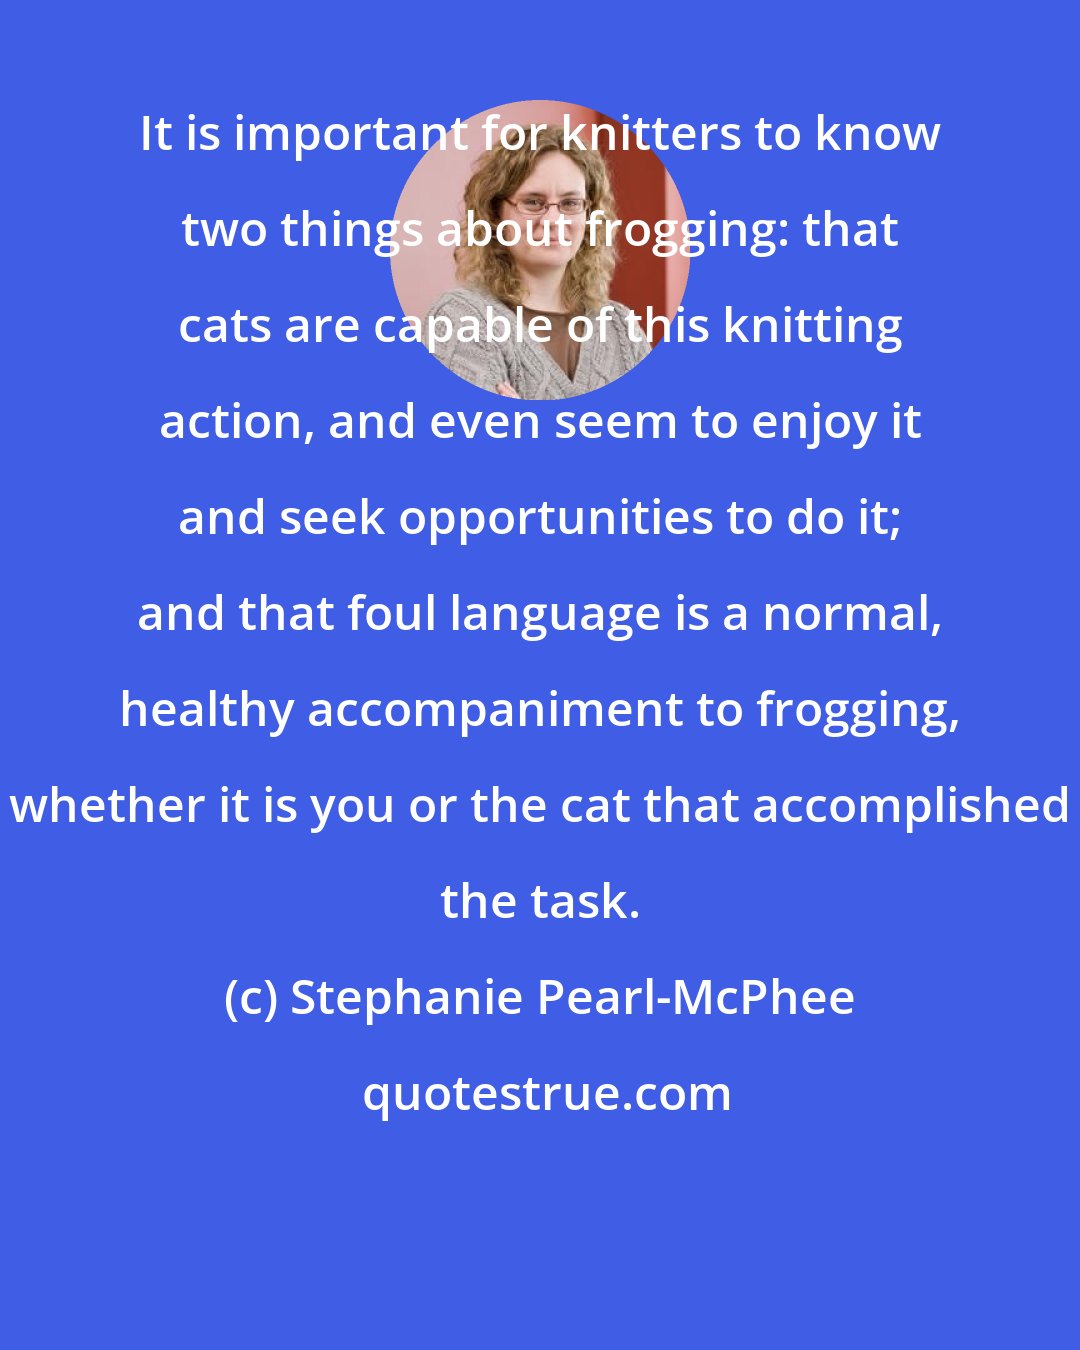 Stephanie Pearl-McPhee: It is important for knitters to know two things about frogging: that cats are capable of this knitting action, and even seem to enjoy it and seek opportunities to do it; and that foul language is a normal, healthy accompaniment to frogging, whether it is you or the cat that accomplished the task.